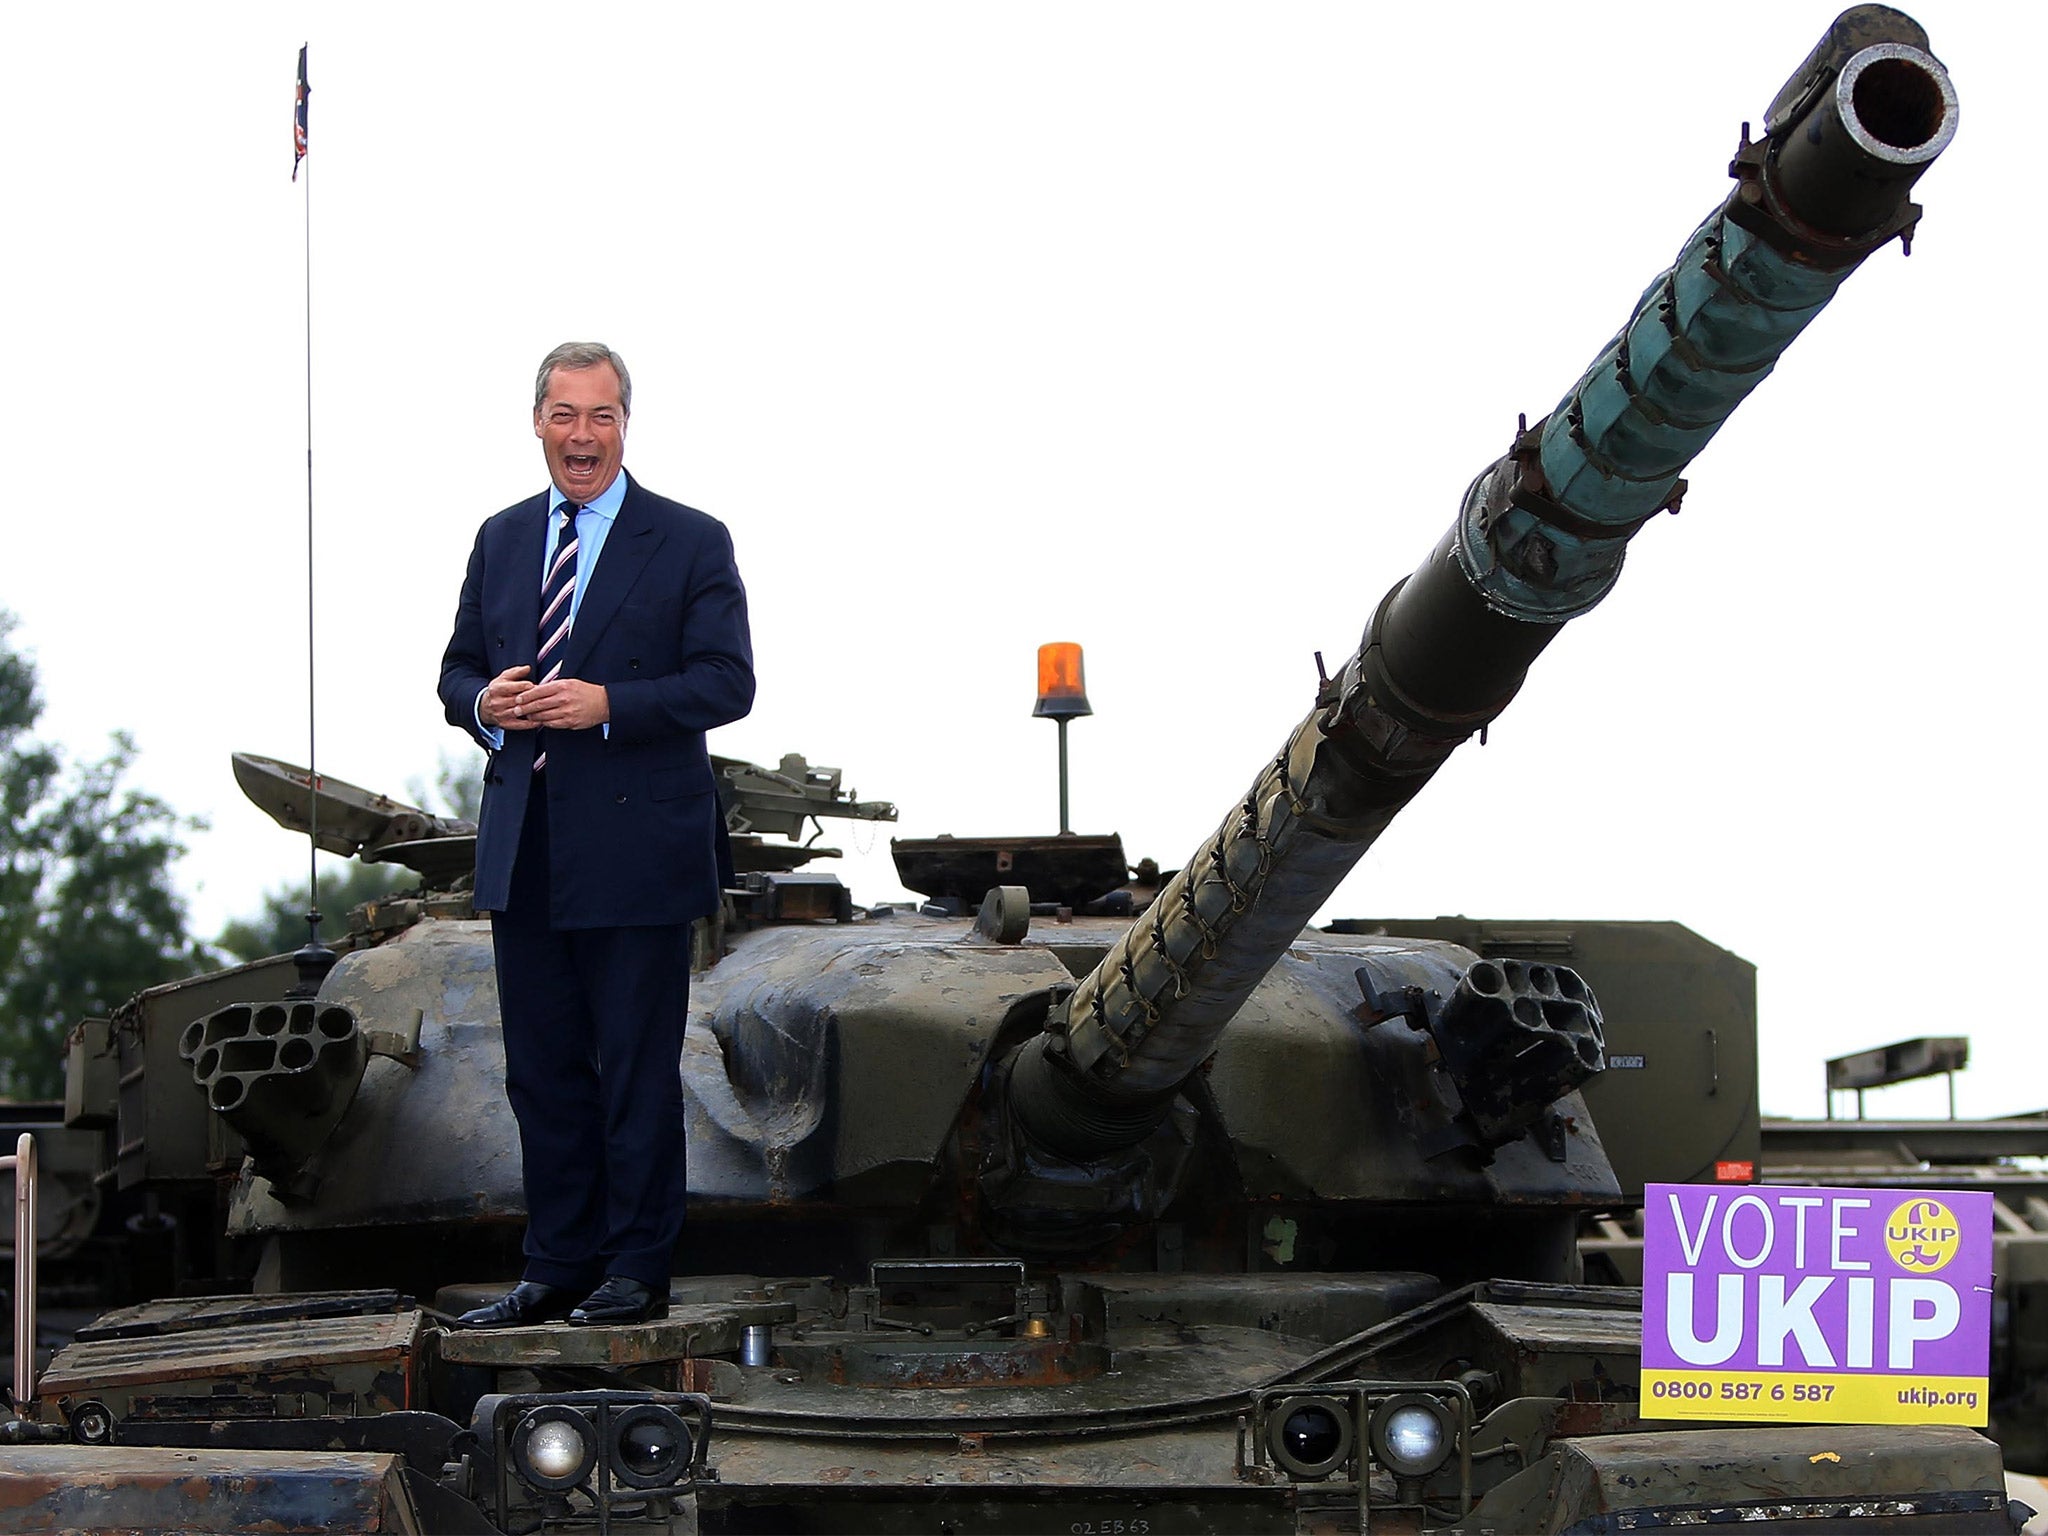 Nigel Farage on the campaign trail at Heywood Tank Museum